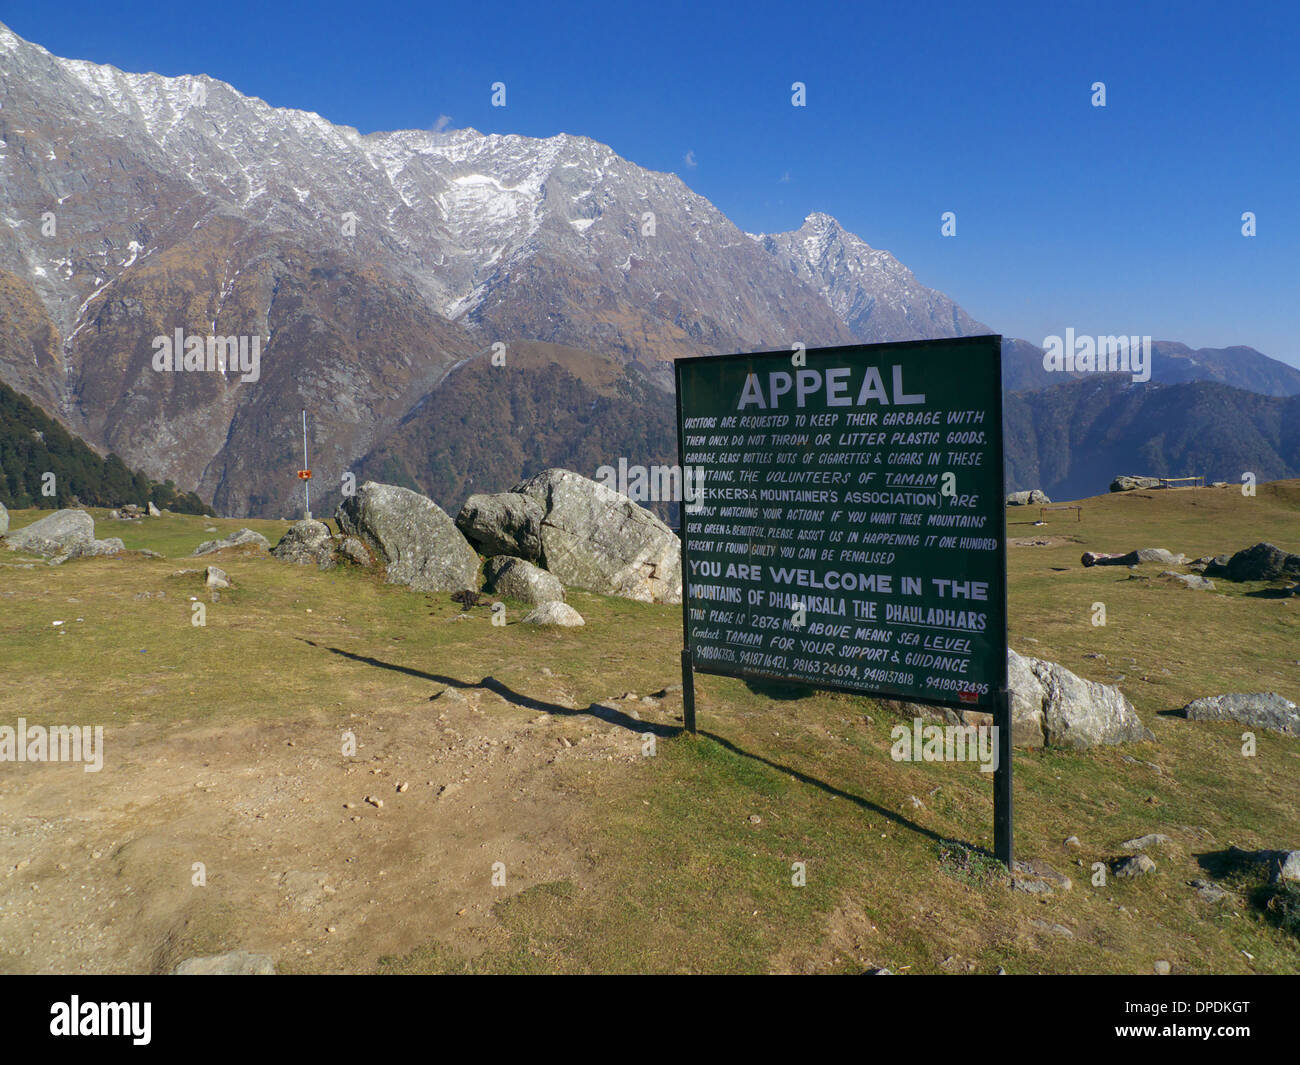 Local recycling group appeal for rubbish to be binned, Triund, nr Mcleodganj Kangra District, Himachal Pradesh, N. India Stock Photo